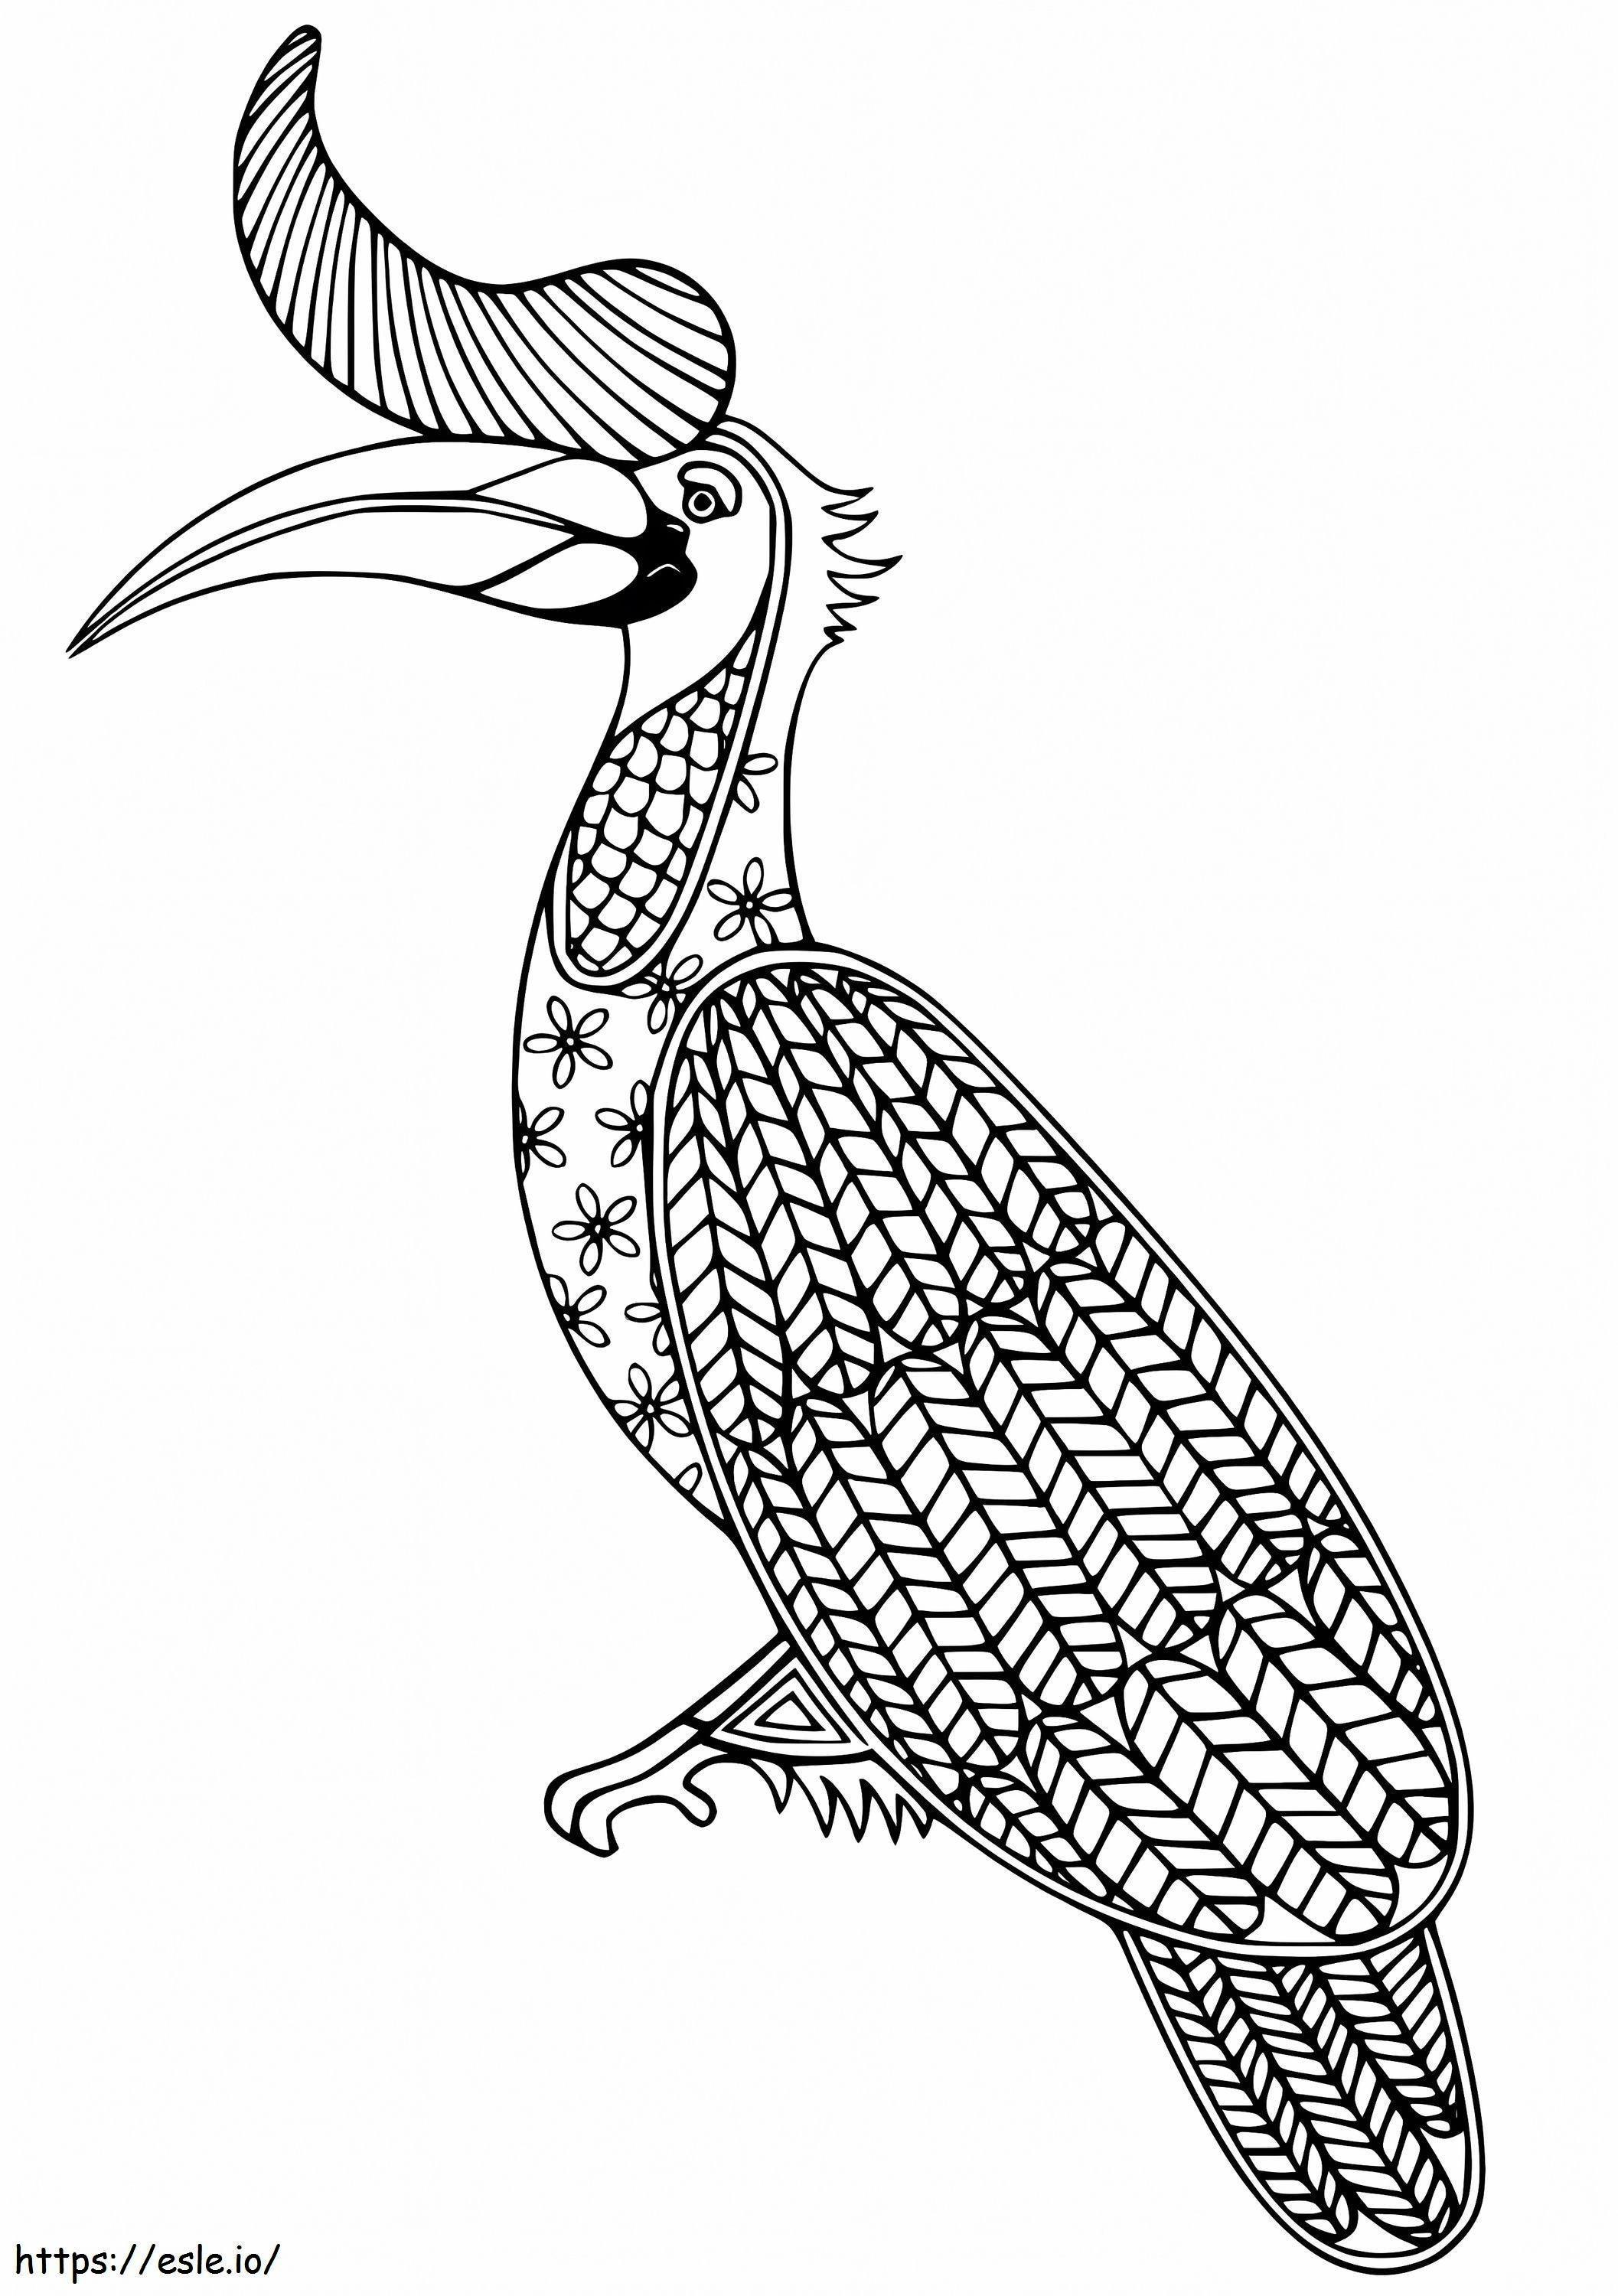 Wonderful Hornbill coloring page